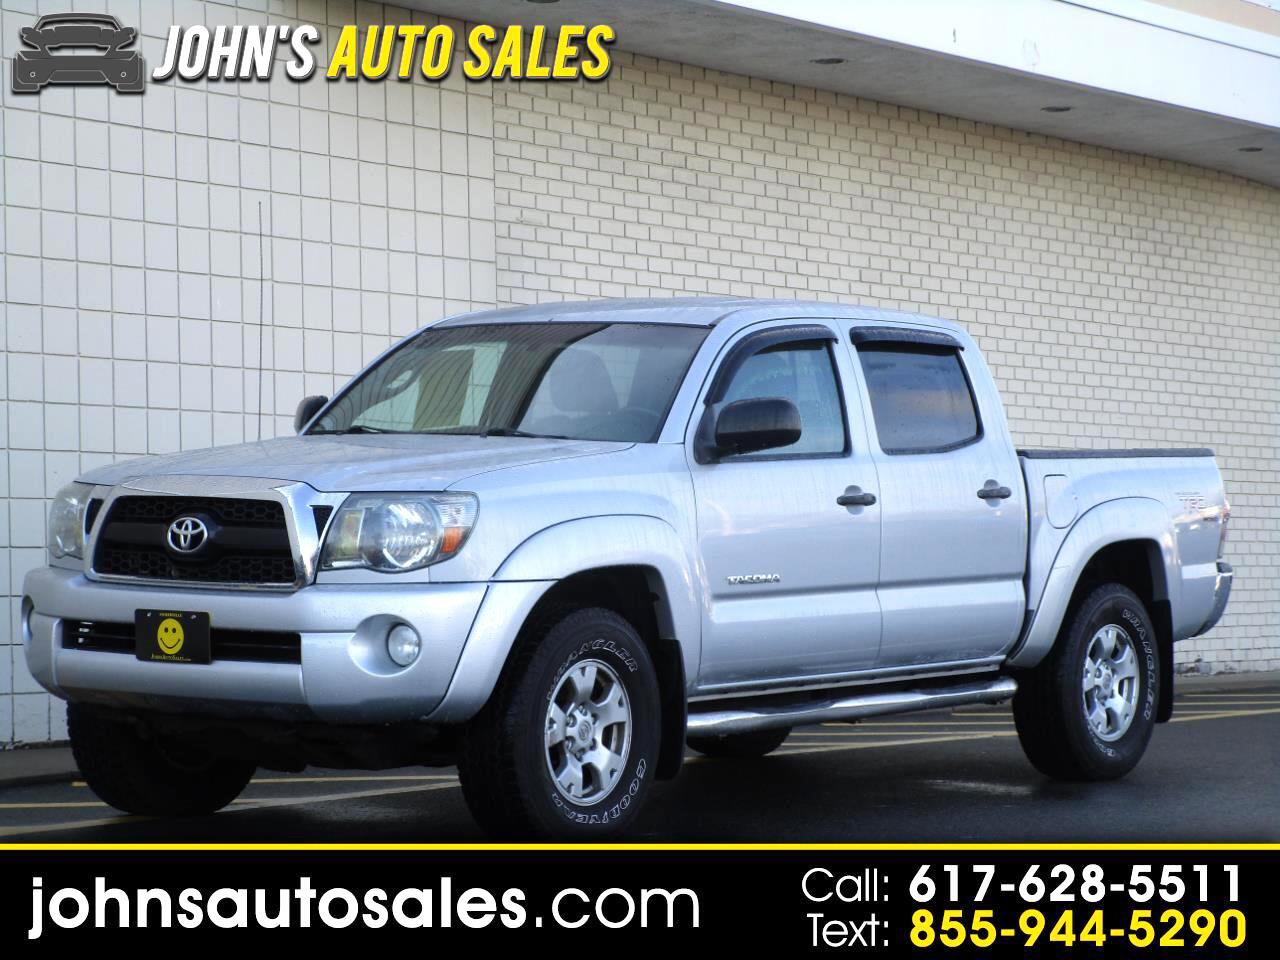 Used 20 Toyota Tacoma Trucks for Sale Right Now in Marlborough ...